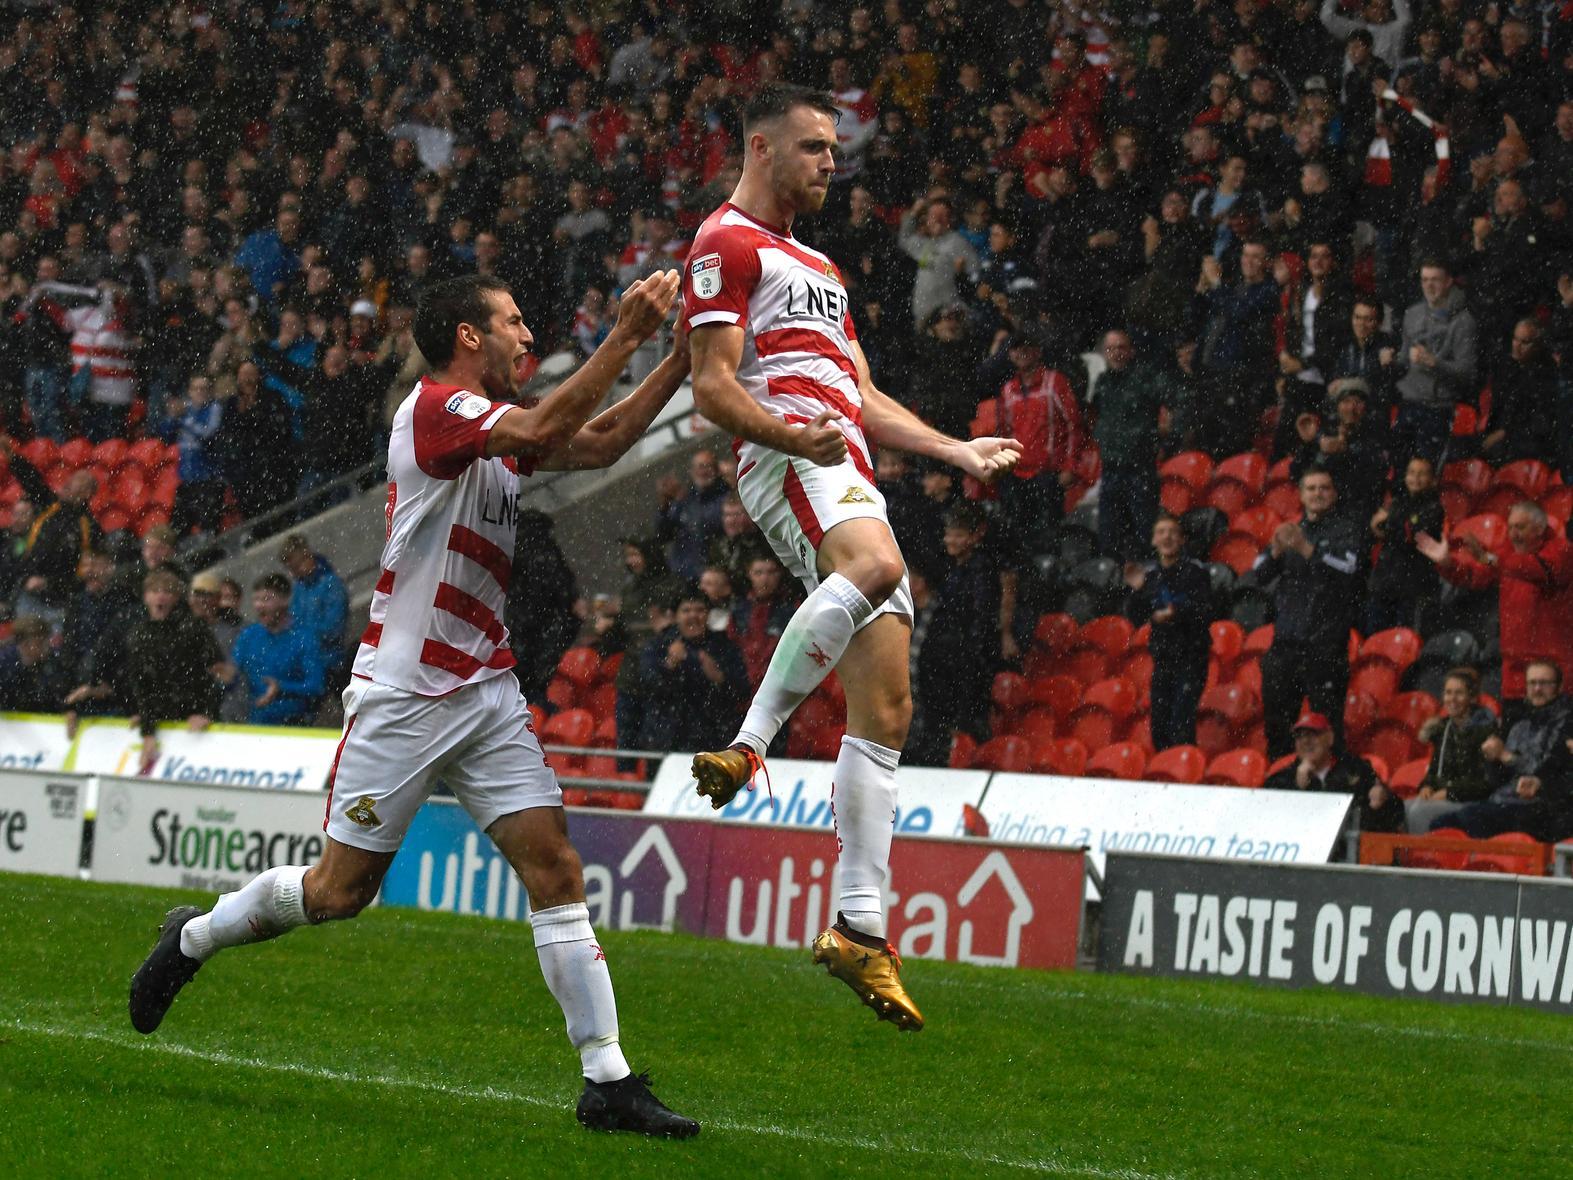 Doncaster Rovers captain Ben Whiteman has committed his long-term future to the club - signing a contract extension which will keep him at the Keepmoat Stadium until the summer of 2023. (Various)